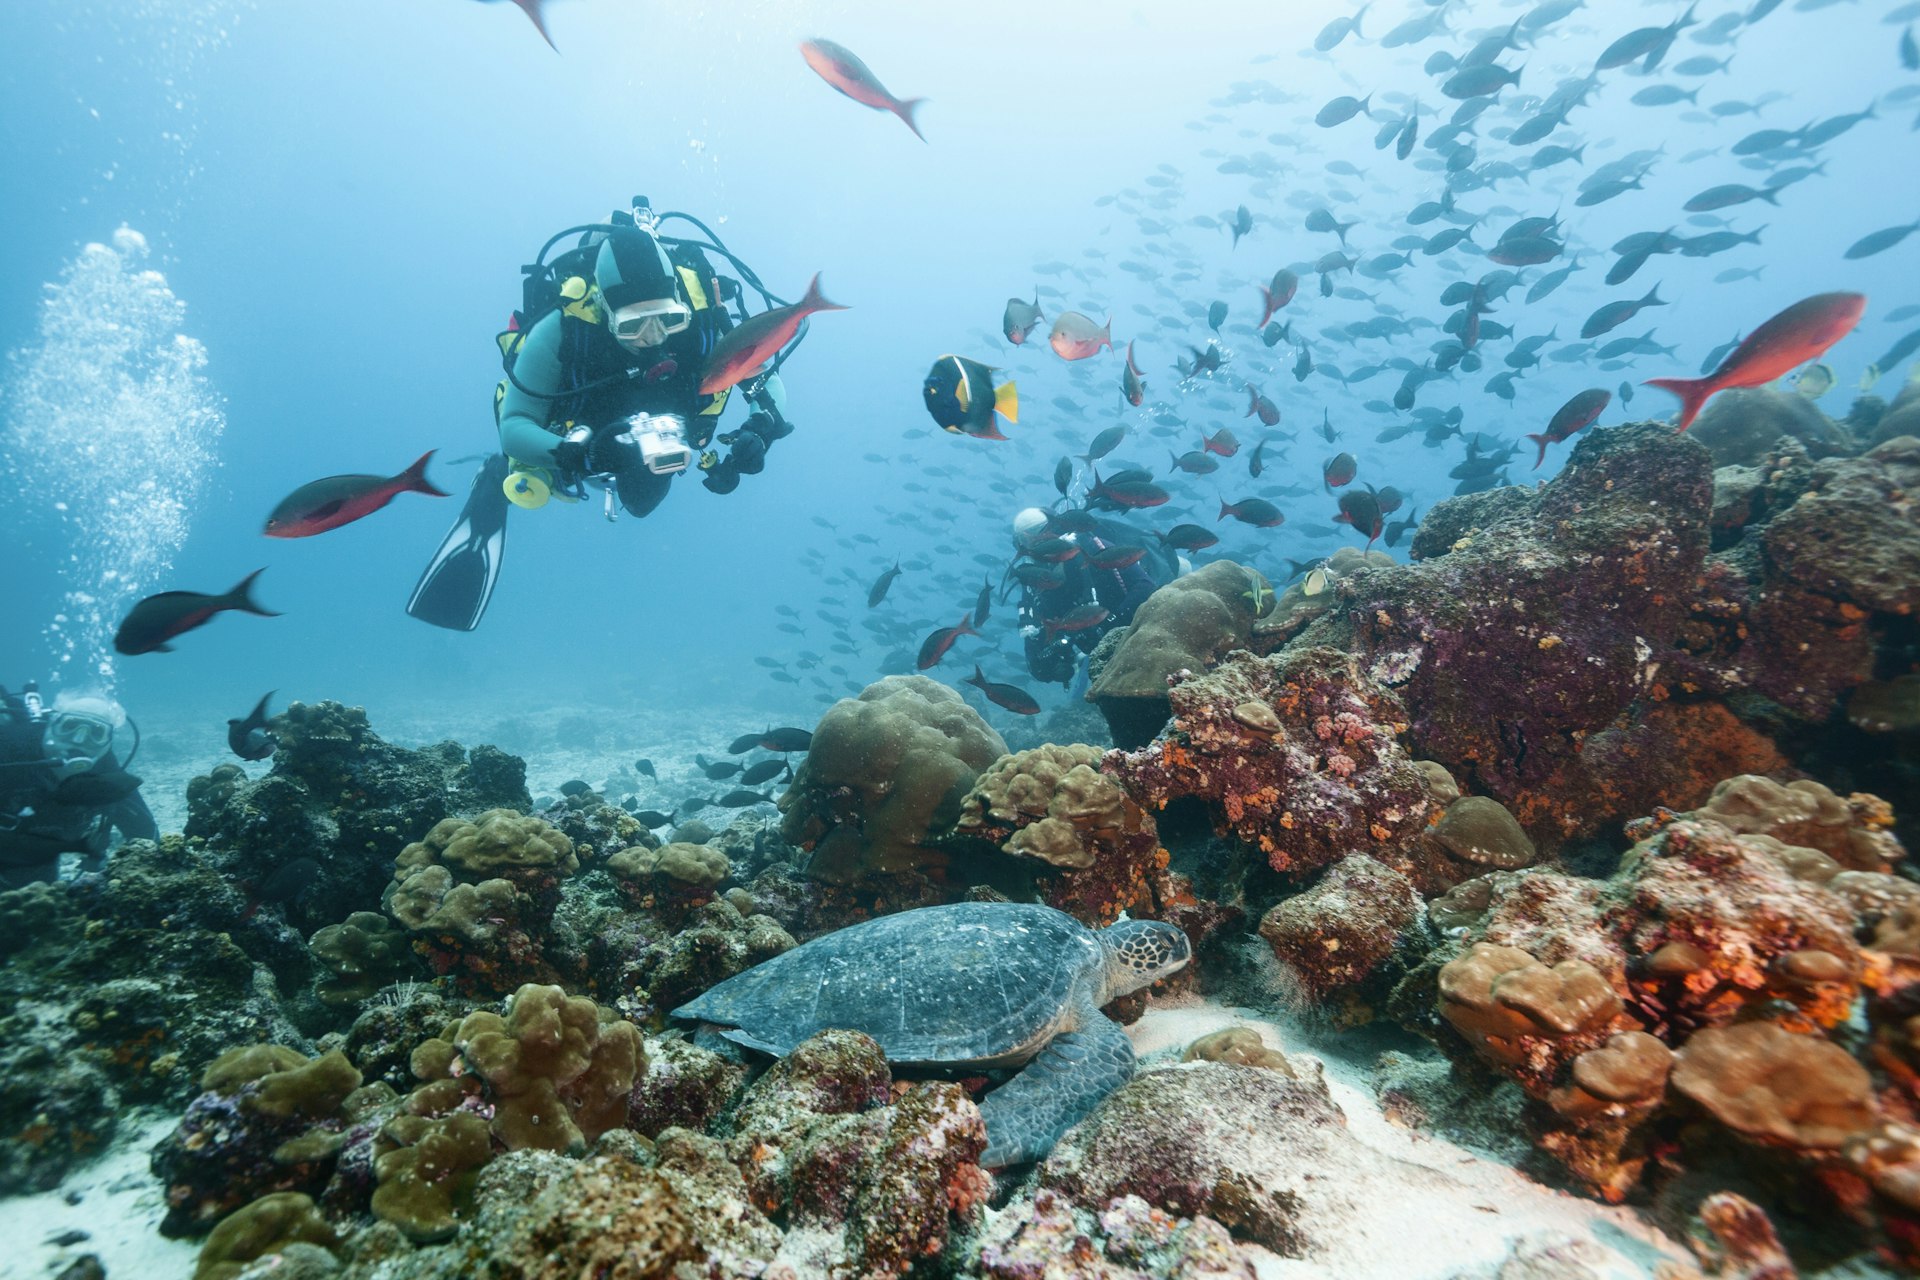 Diver viewing a green sea turtle, Galapagos Islands.